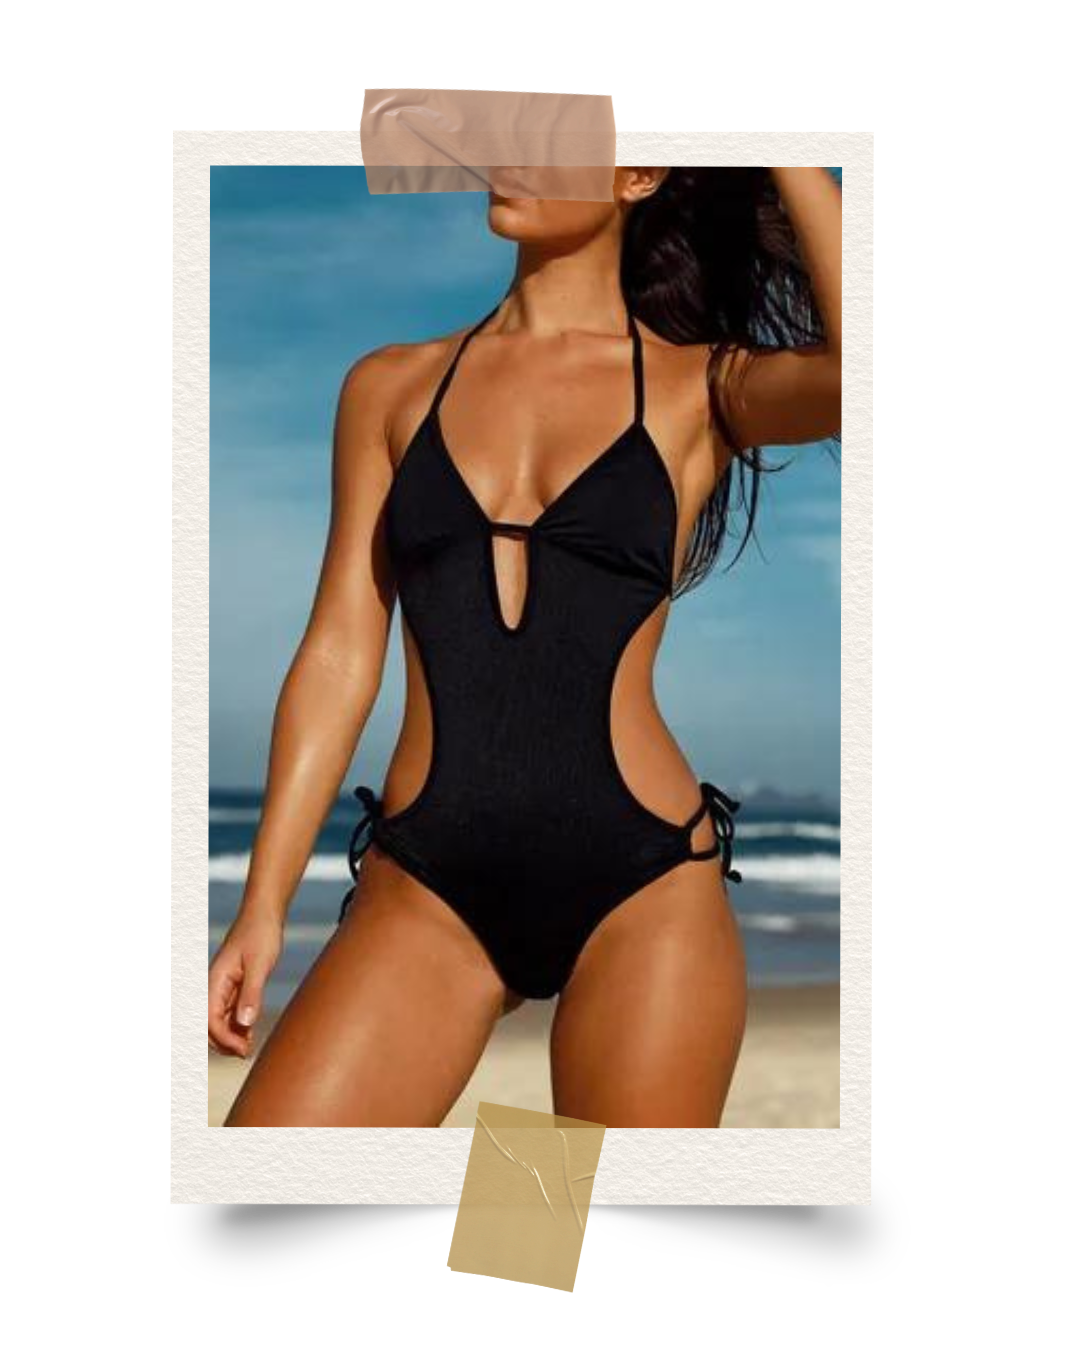 Dive into 2024: Top Trends in Pool Party Swimwear for Your Vegas Splash - The One Piece Renaissance: Once a staple of swimwear's bygone era, one-pieces are back and bolder than ever.